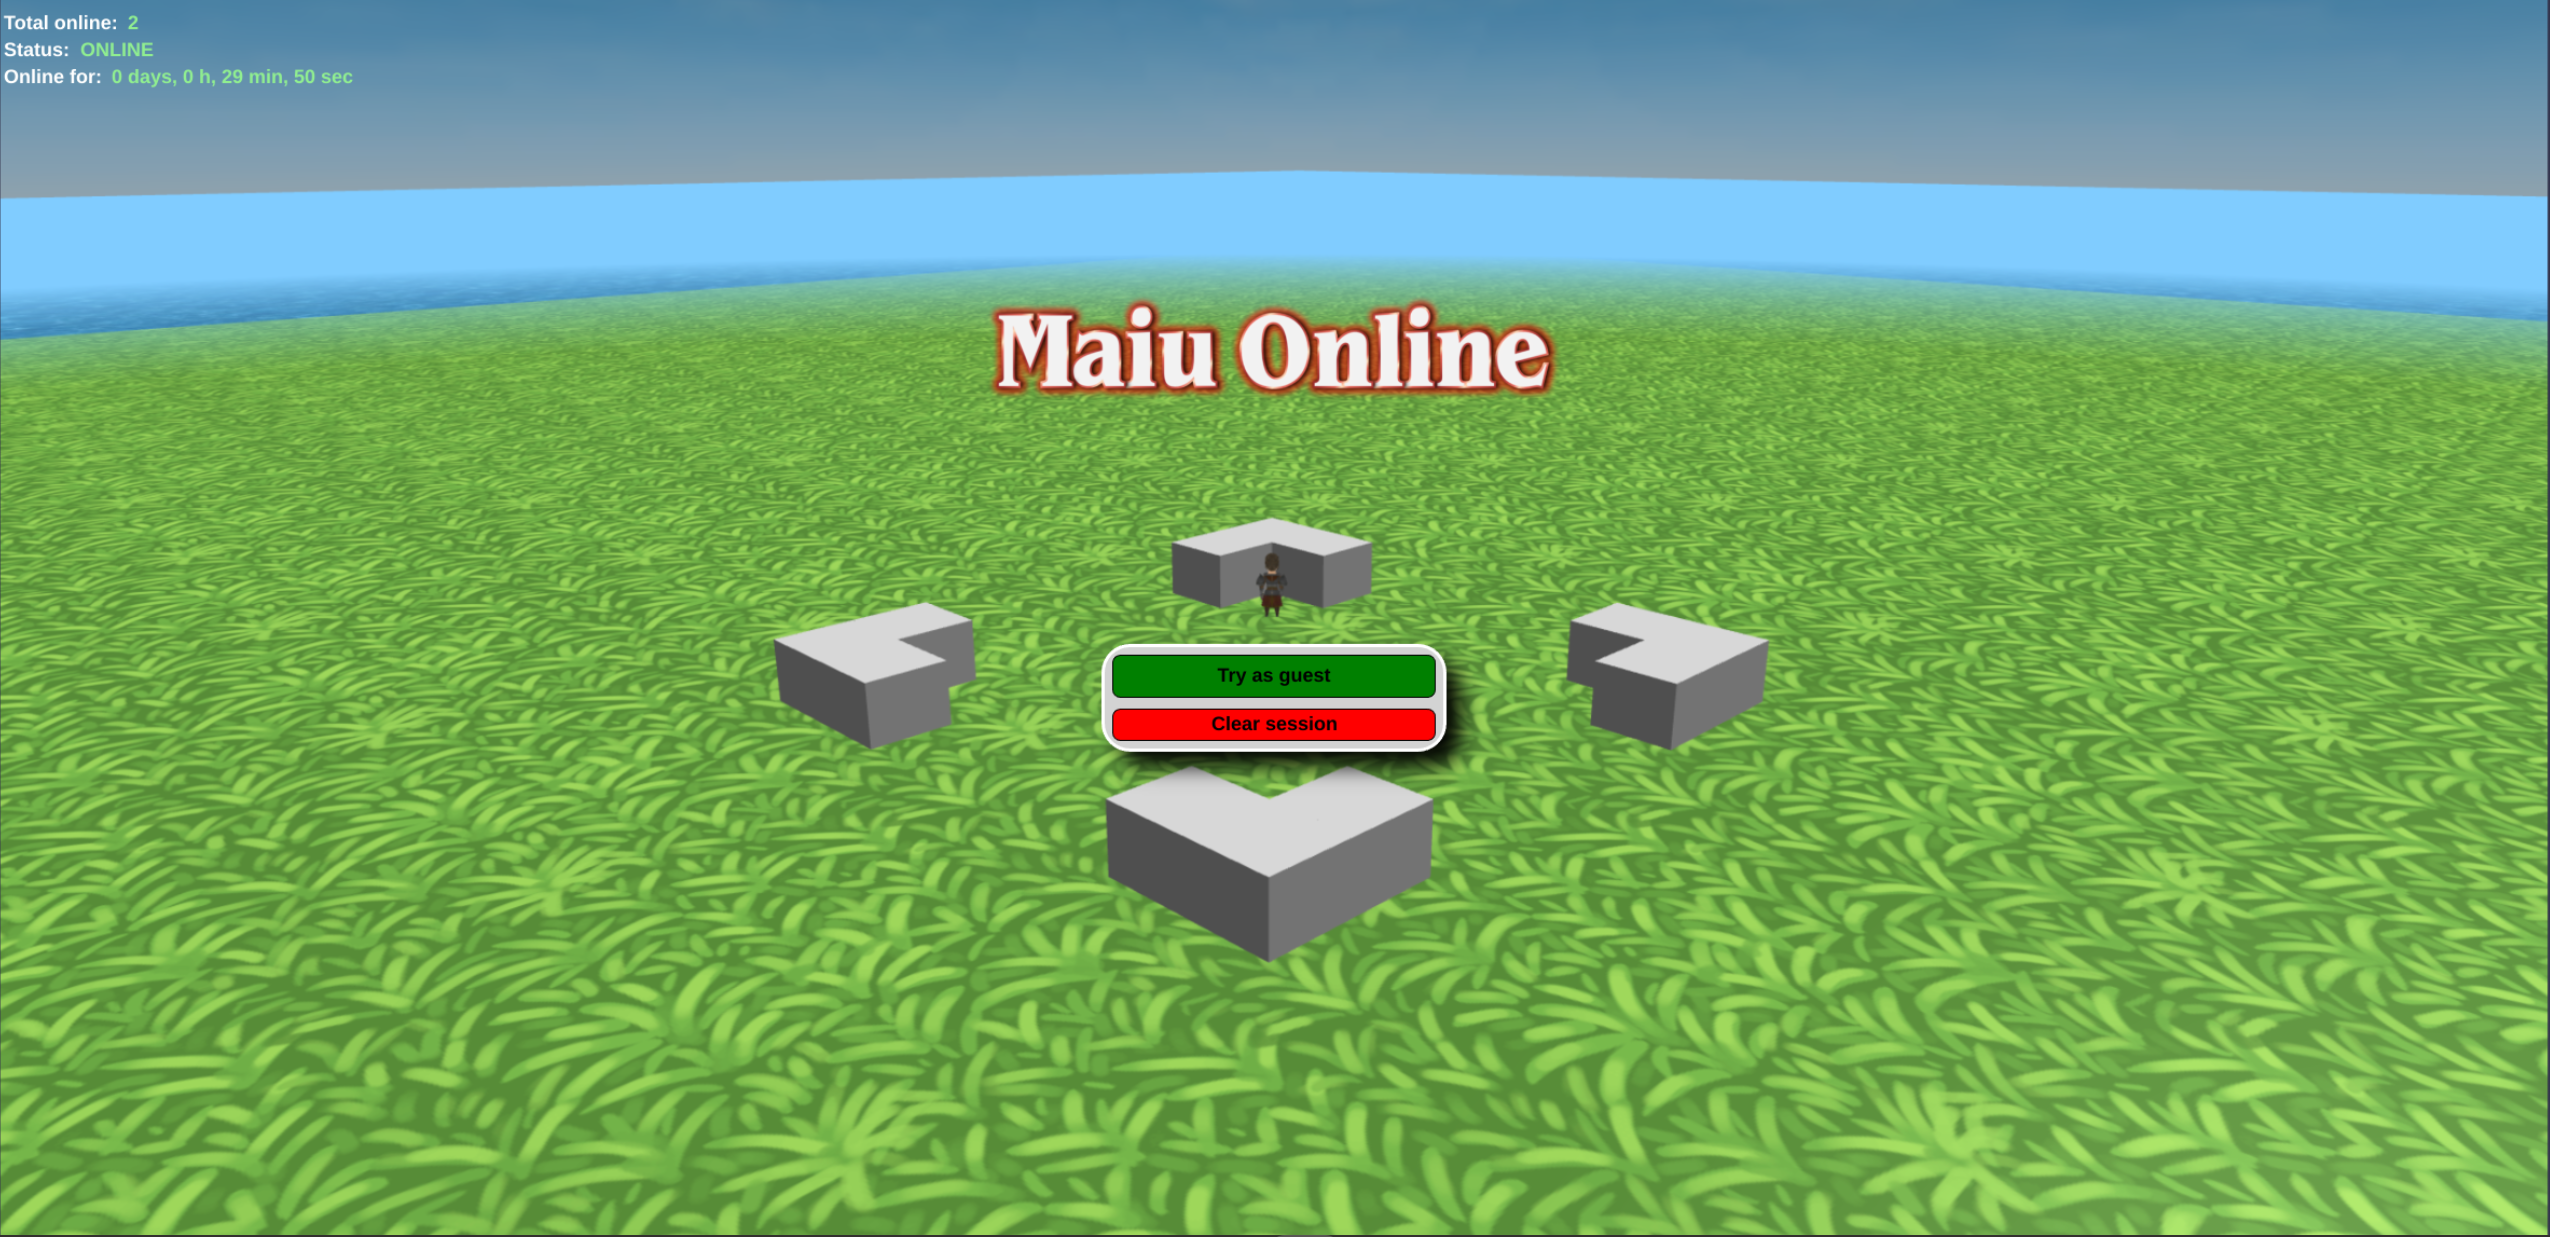 JavaScript MMORPG from Scratch - Maiu online #1 - Introduction